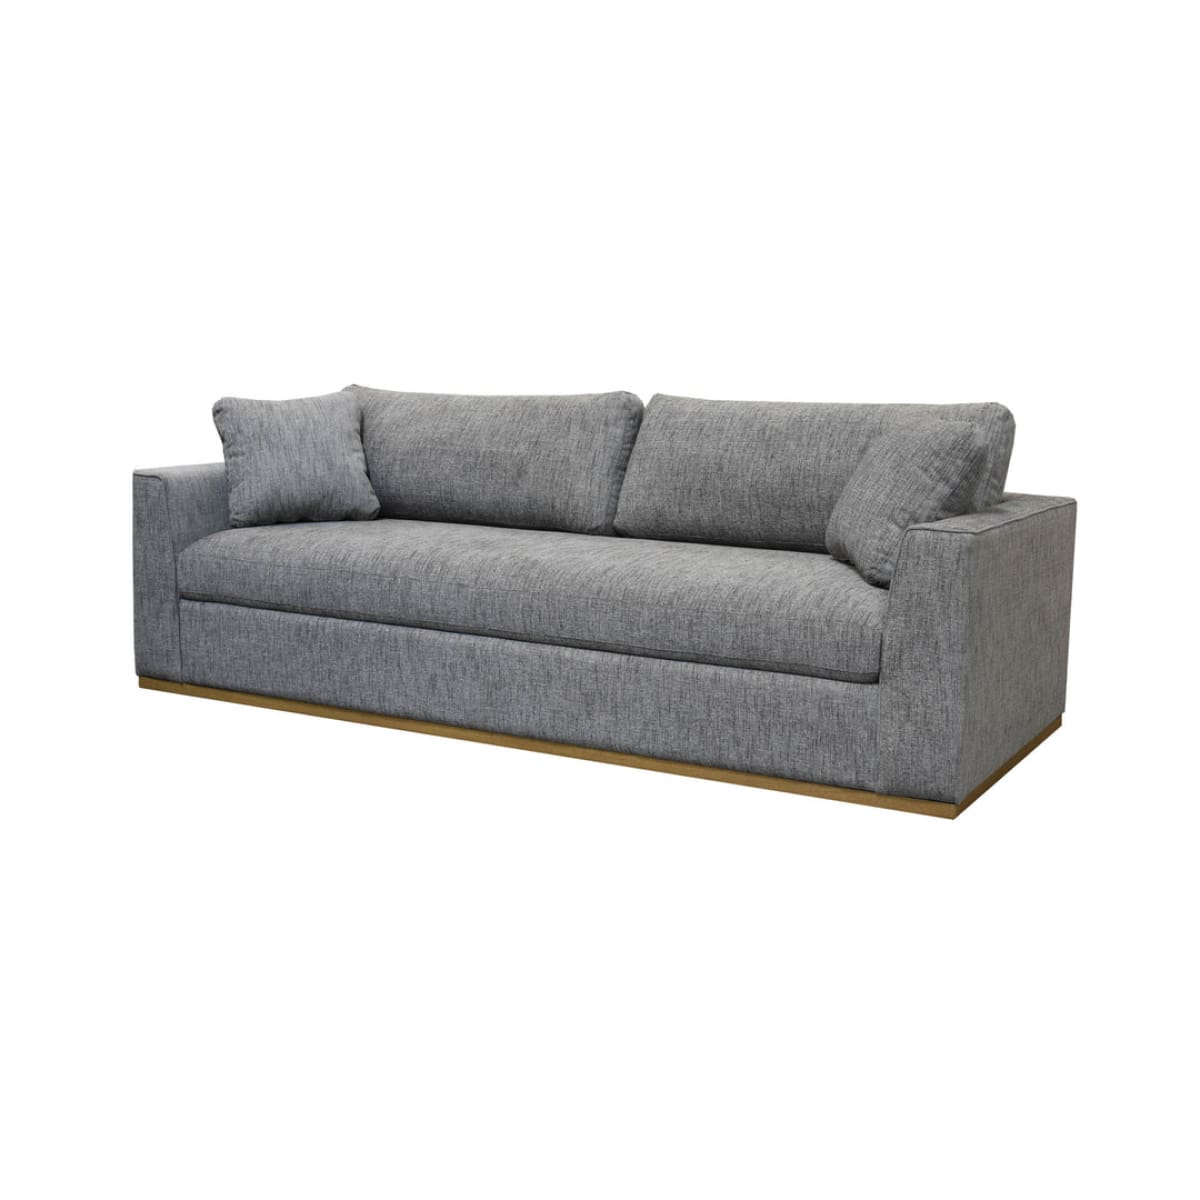 Anderson Sofa - Woven Charcoal - lh-import-sofas